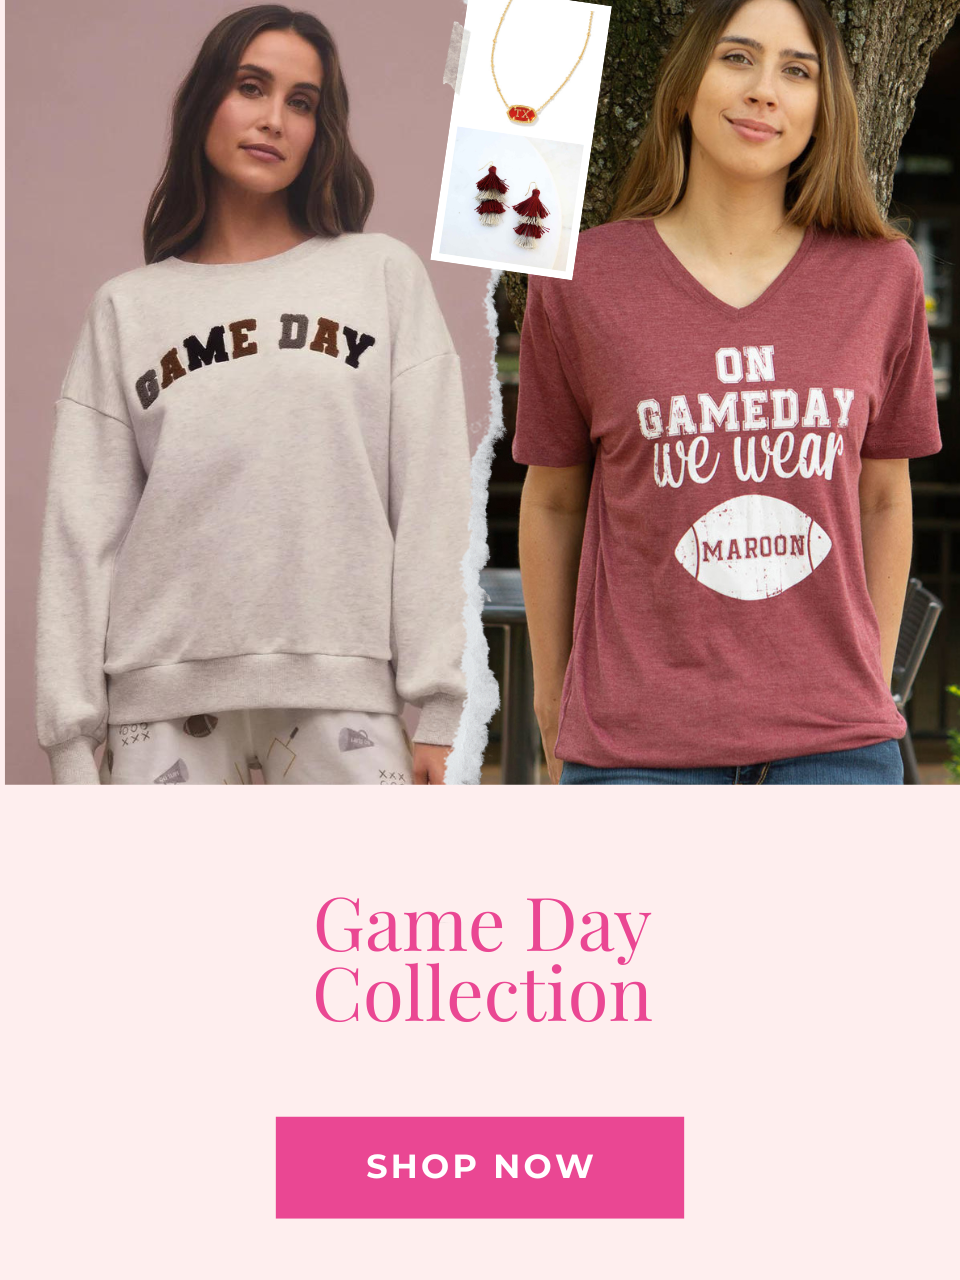 Game day tops and accessories 